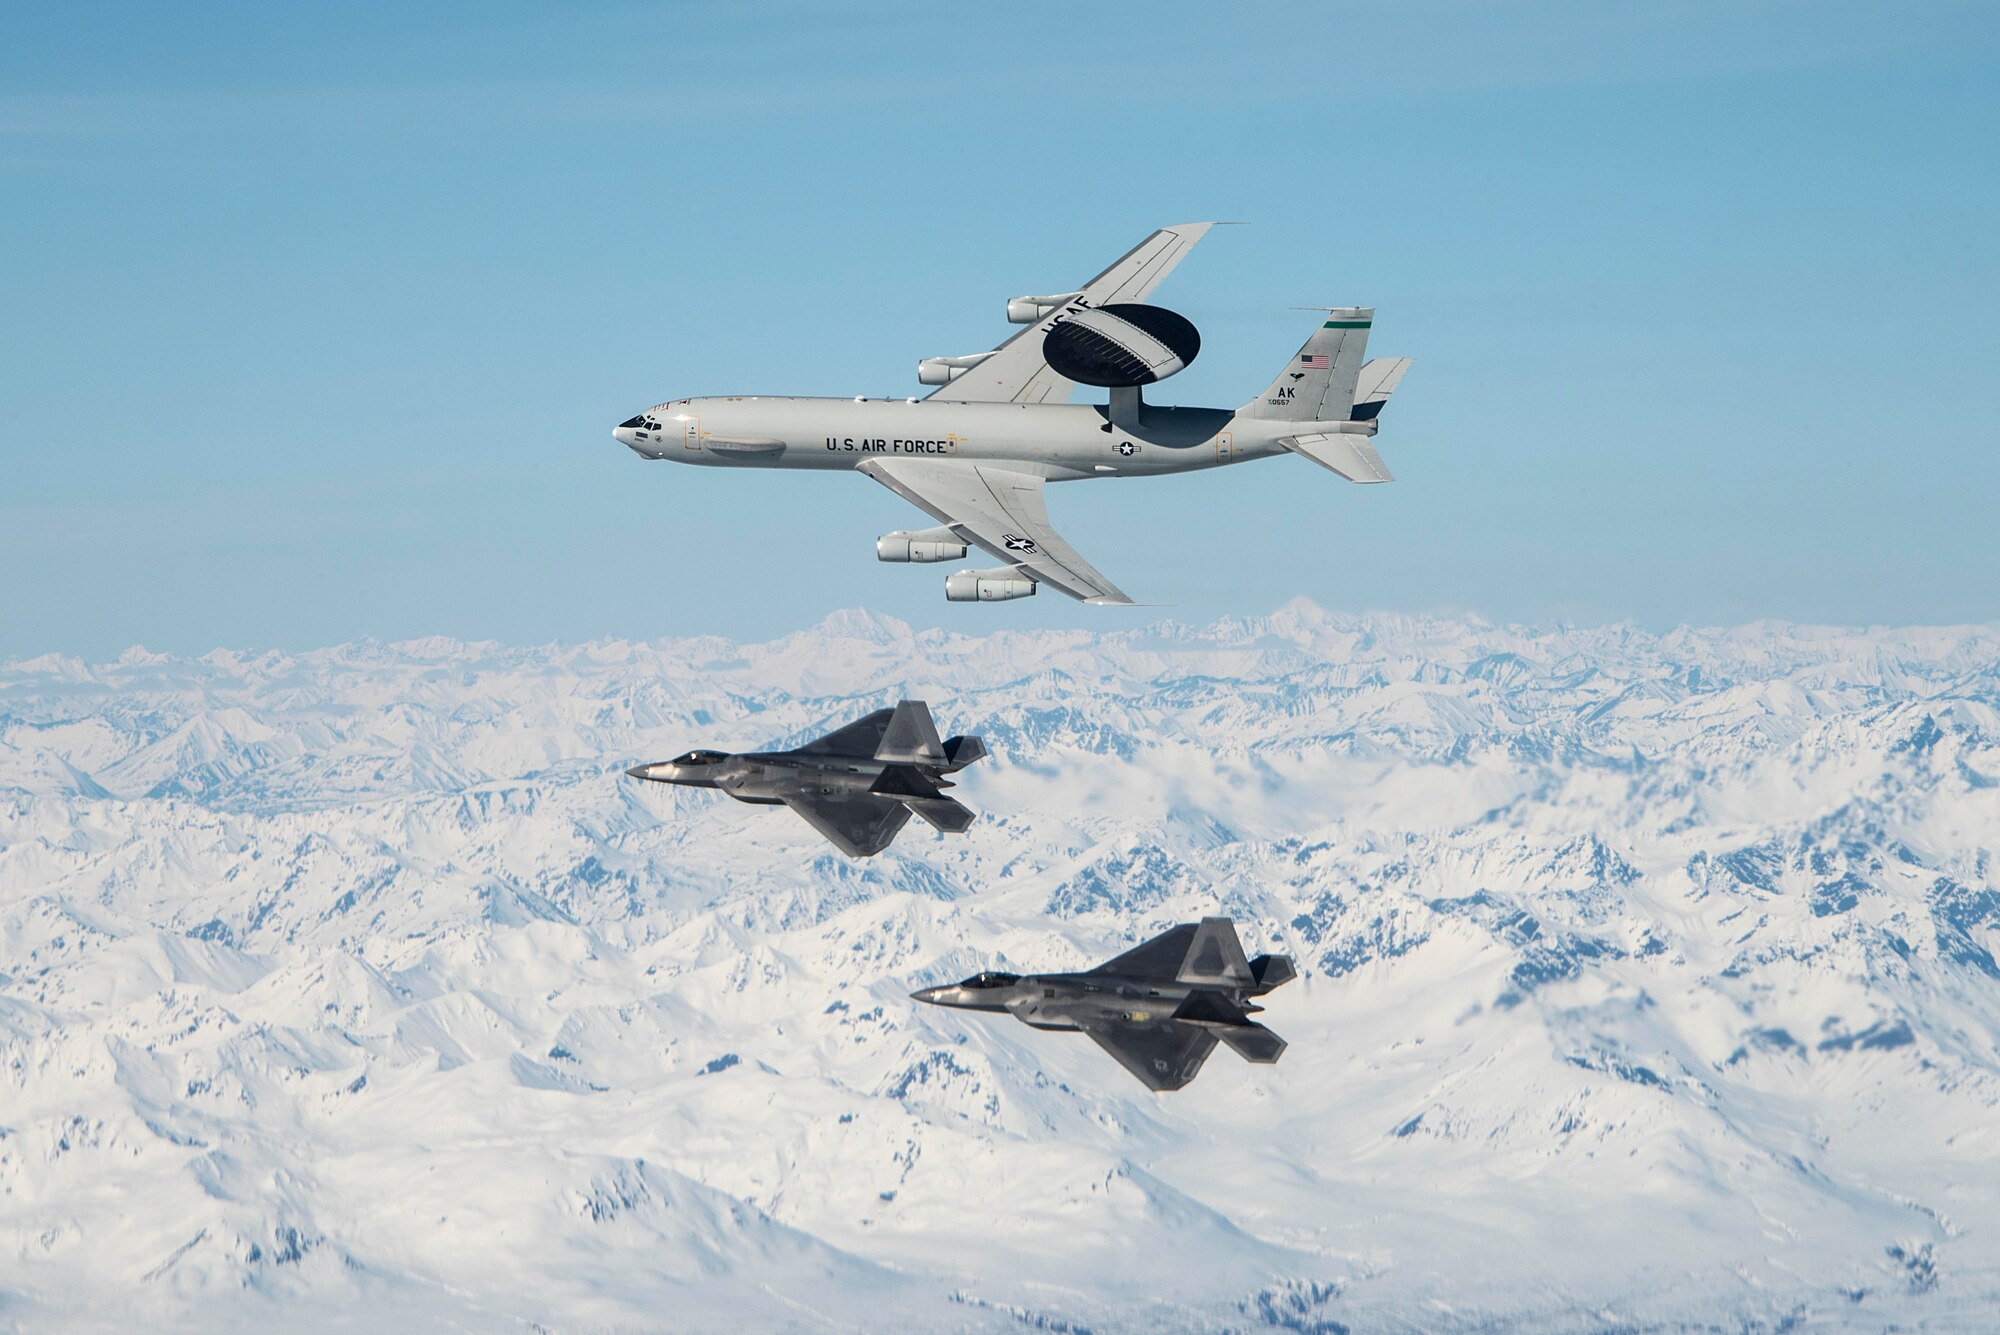 An E-3 Sentry and F-22 Raptors assigned to Joint Base Elmendorf-Richardson, Alaska, fly over mountains May 5, 2020. The aircraft were part of a formation flight demonstrating airpower and consisted of active duty, Guard and Reserve components. (U.S. Air Force photo by Tech. Sgt. Jerilyn Quintanilla)